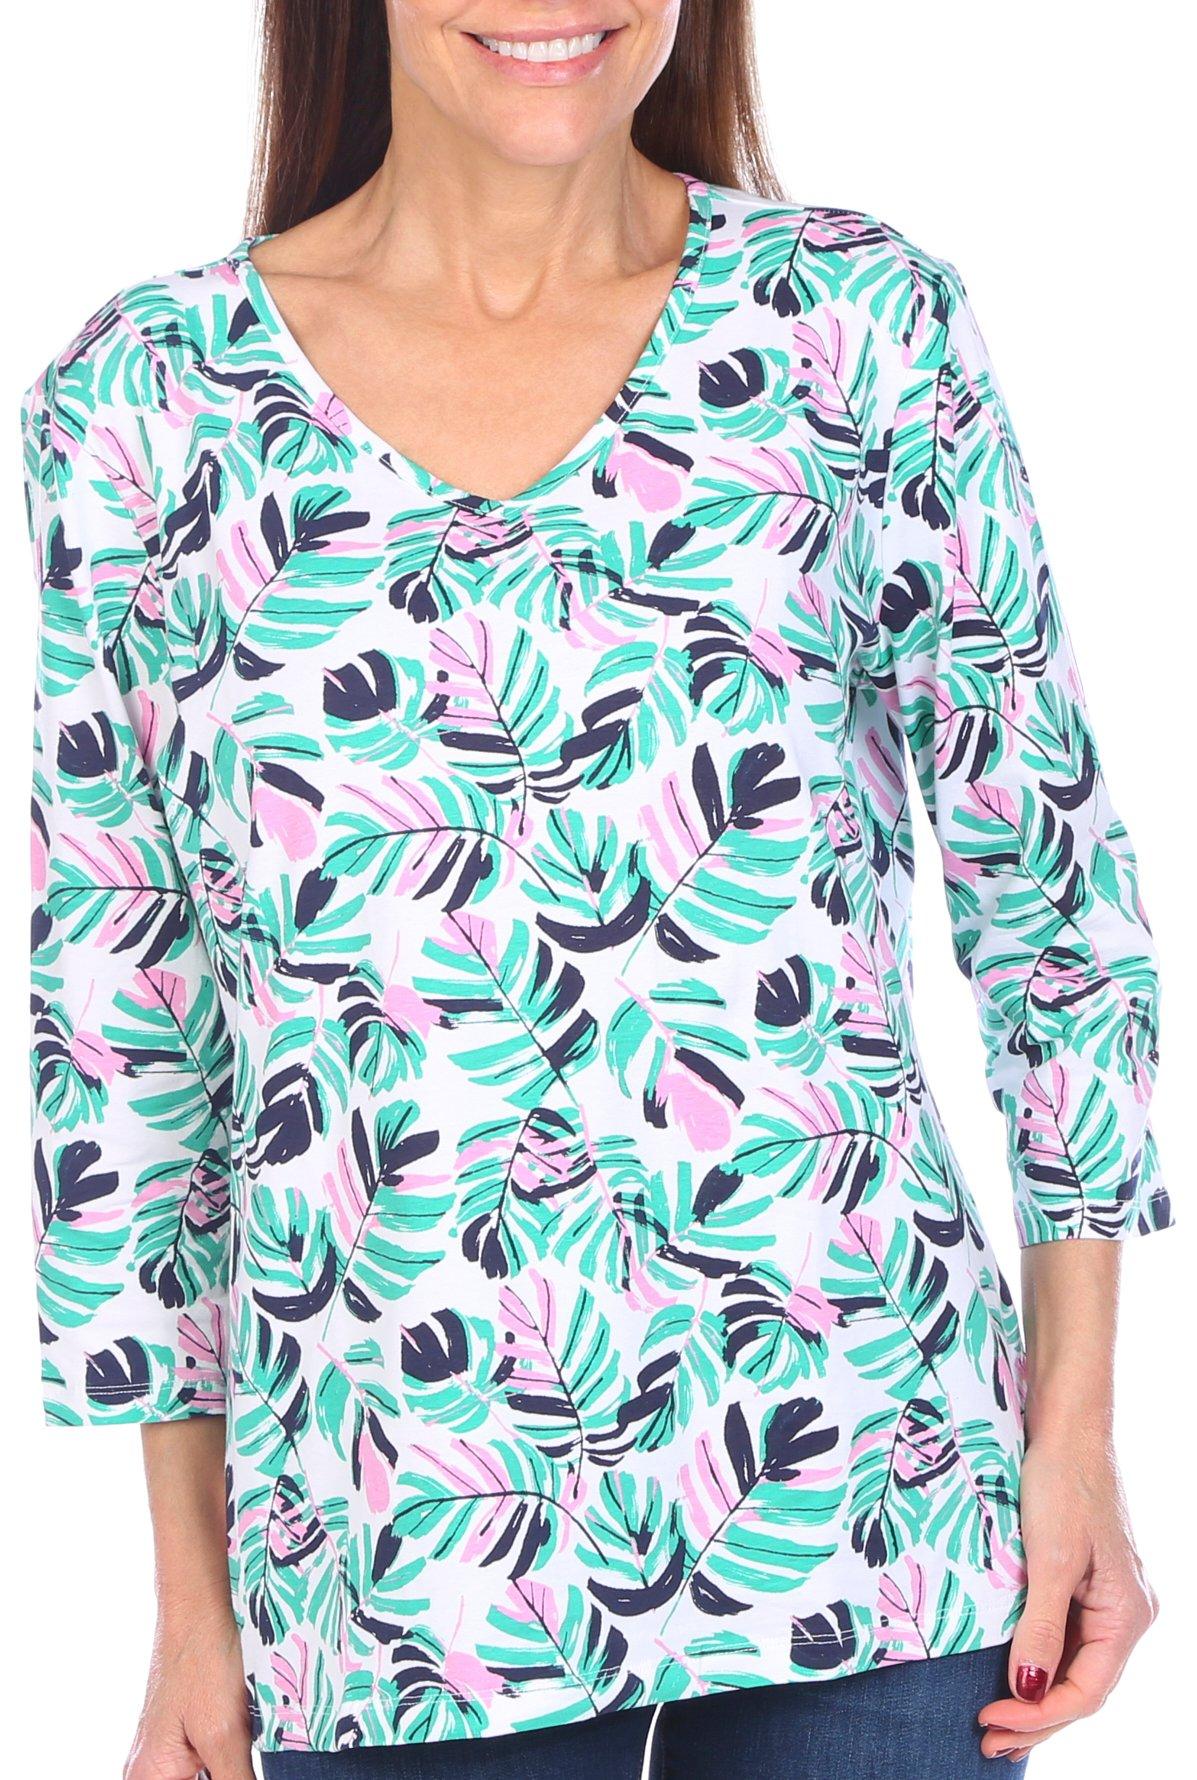 Coral Bay Womens Fronds Print V-Neck 3/4 Sleeve Top